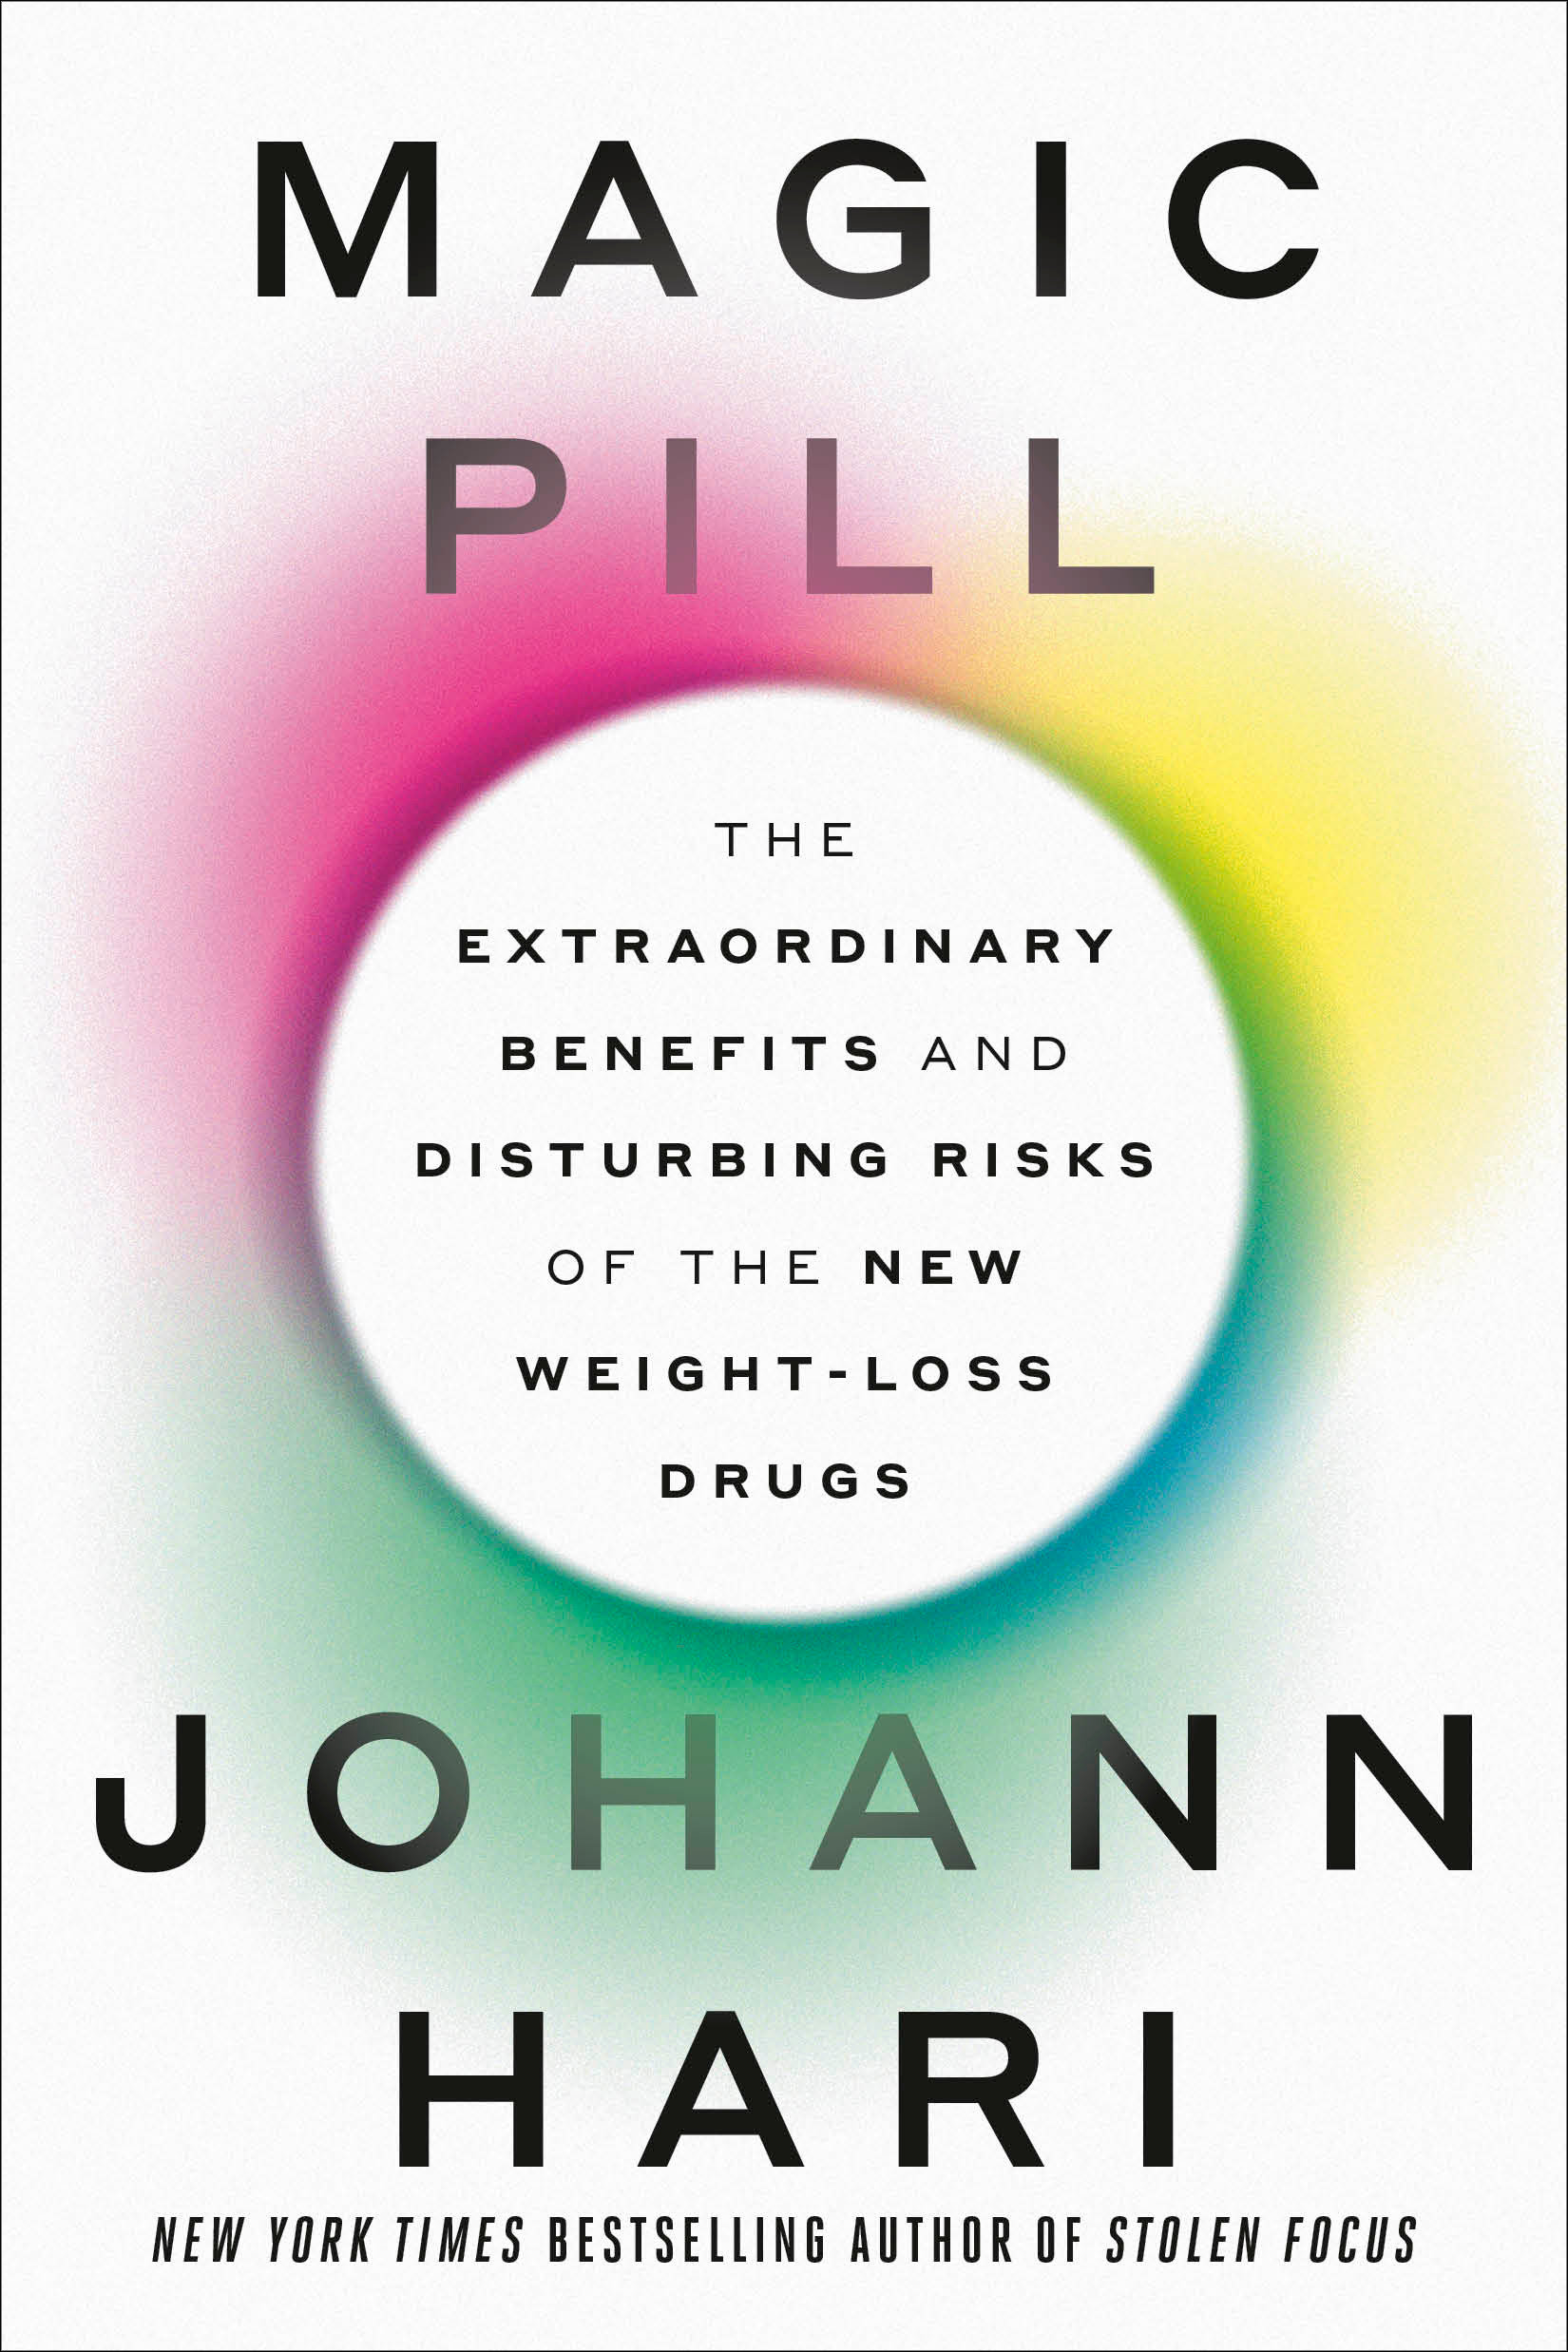 Magic Pill The Extraordinary Benefits and Disturbing Risks of the New Weight-Loss Drugs cover image